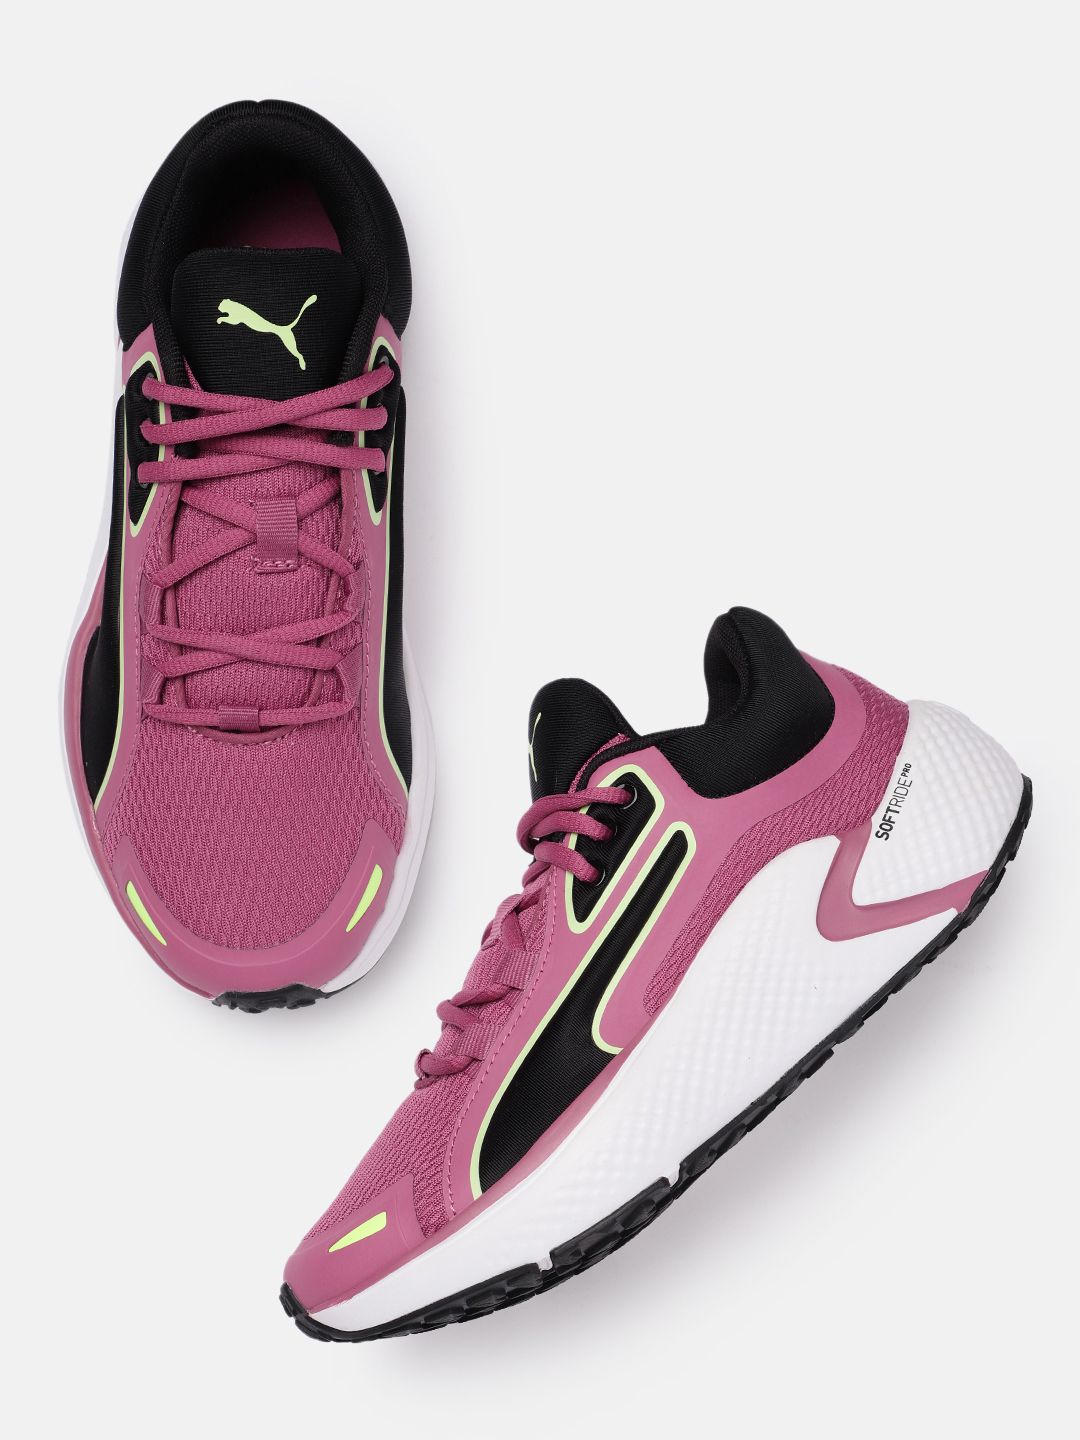 Puma Women Softride Procast Walking Shoes Price in India